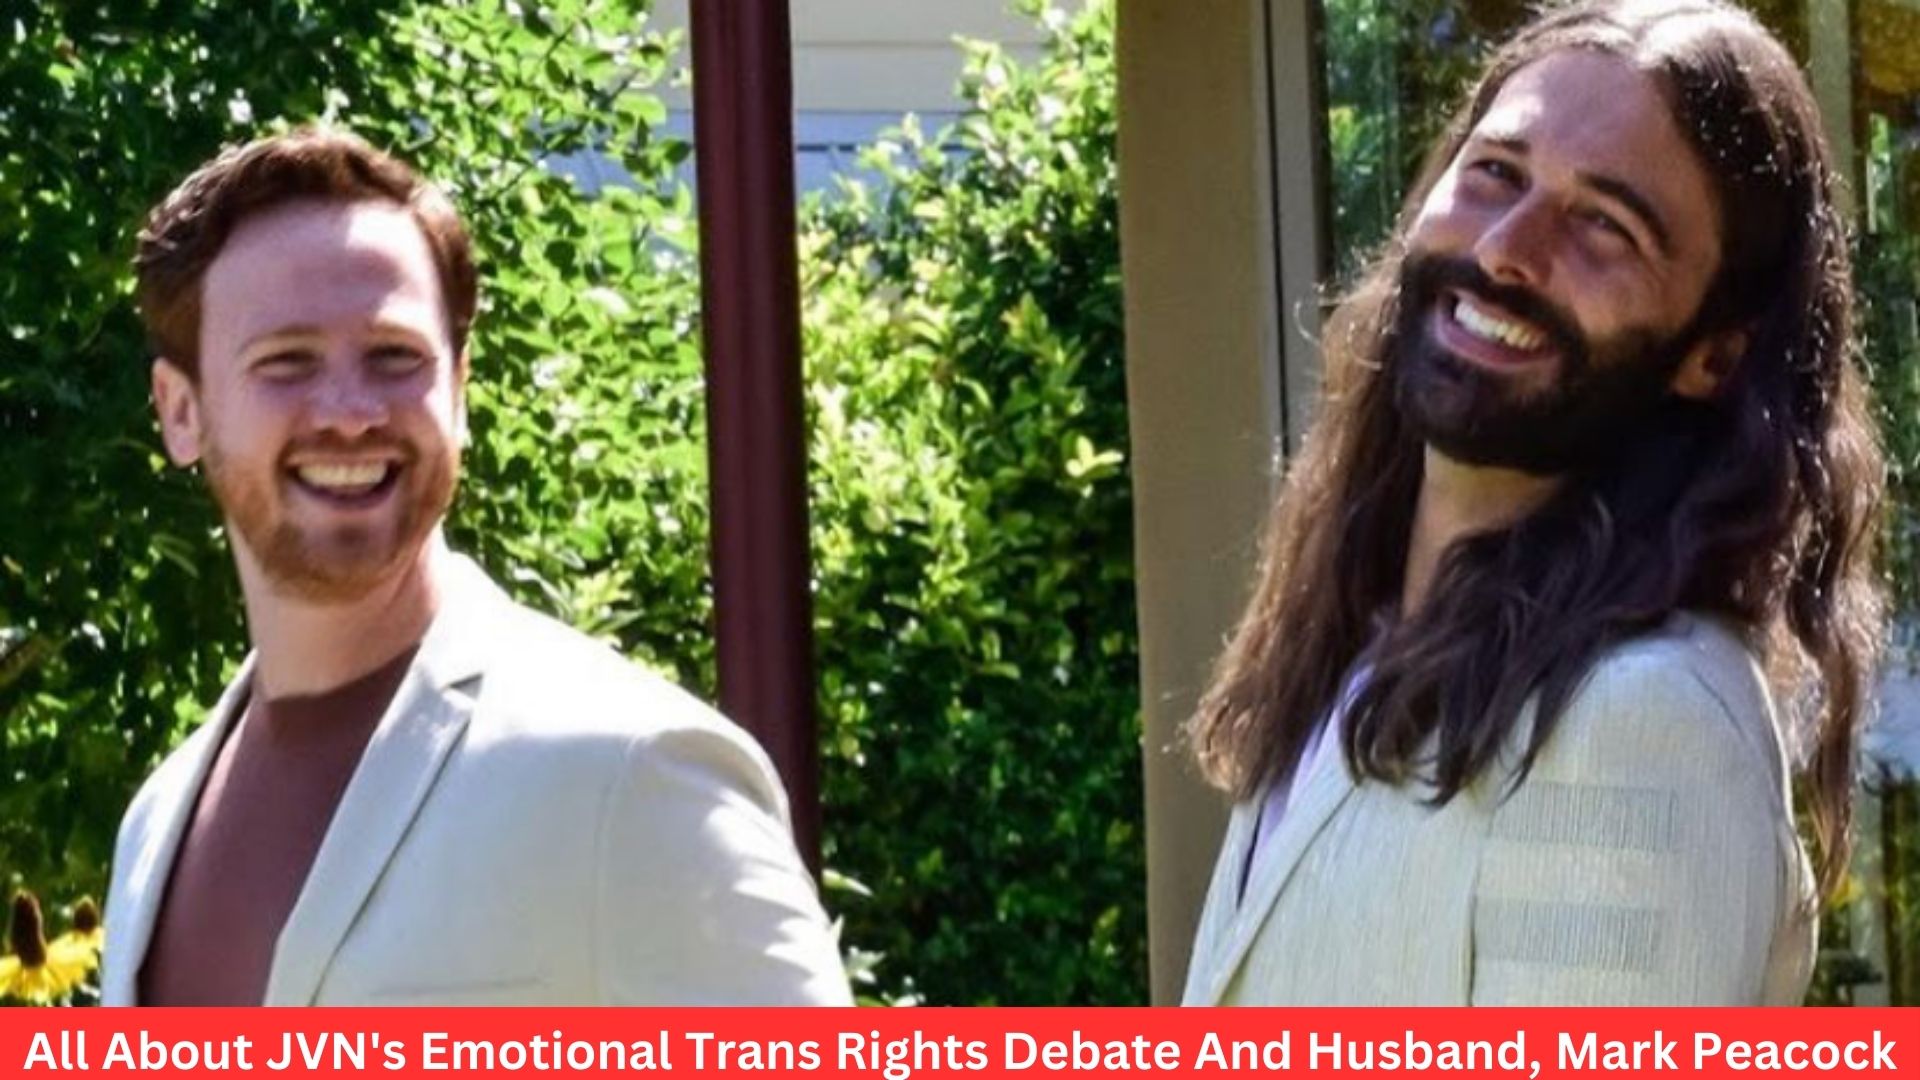 All About JVN's Emotional Trans Rights Debate And Husband, Mark Peacock